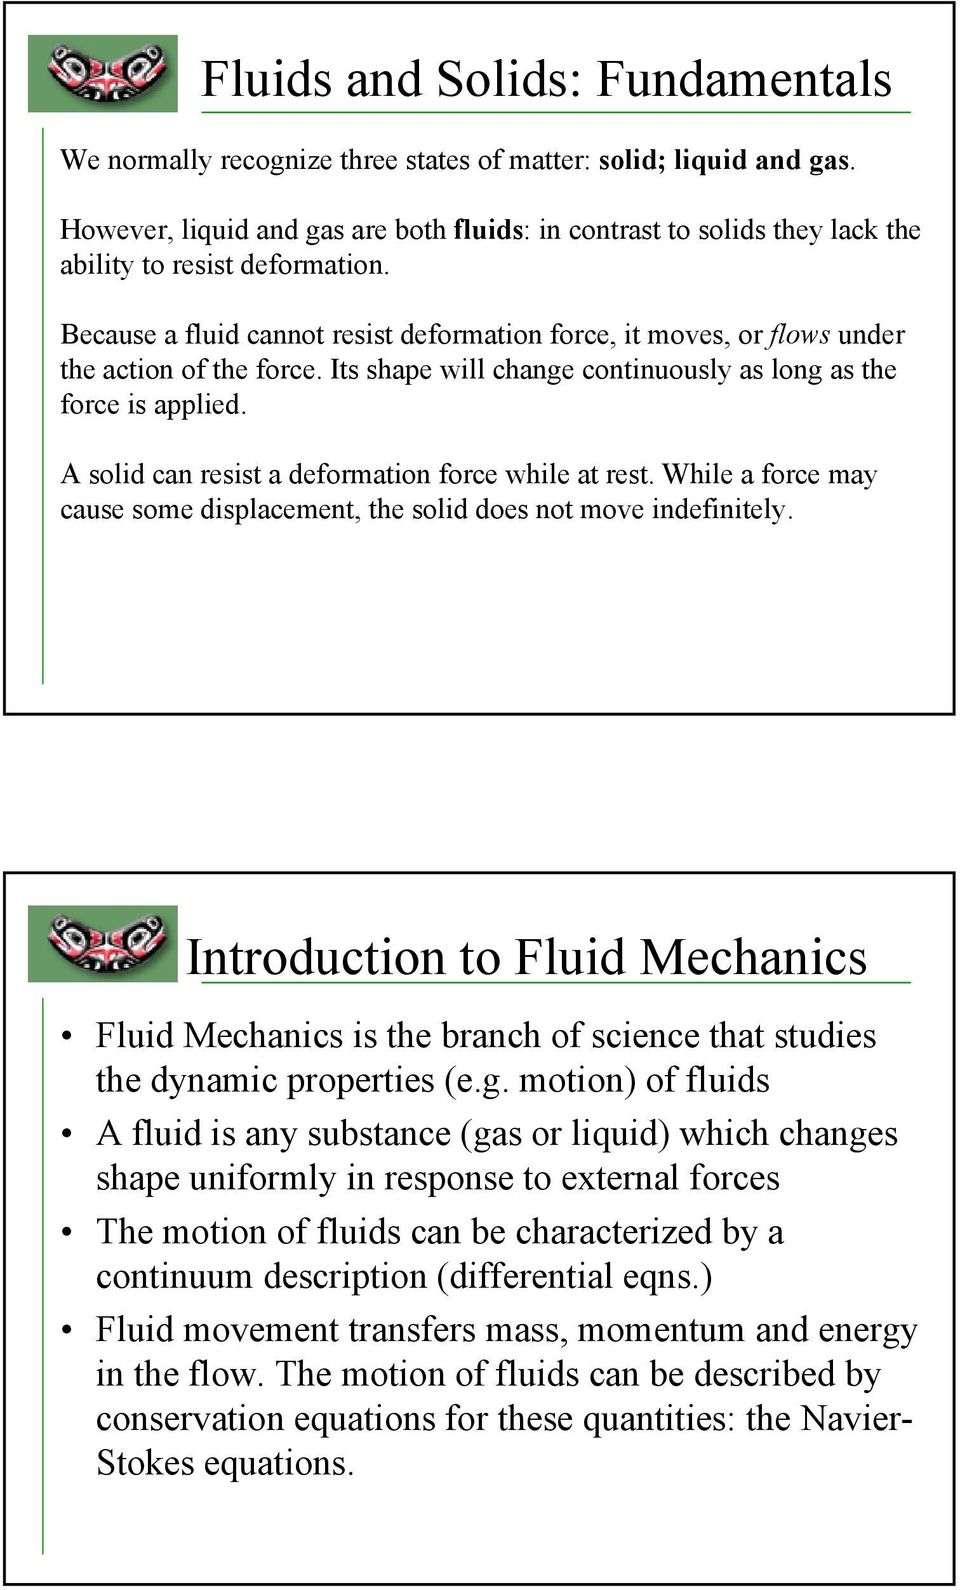 Because a fluid cannot resist deformation force, it moves, or flows under the action of the force. Its shape will change continuously as long as the force is applied.